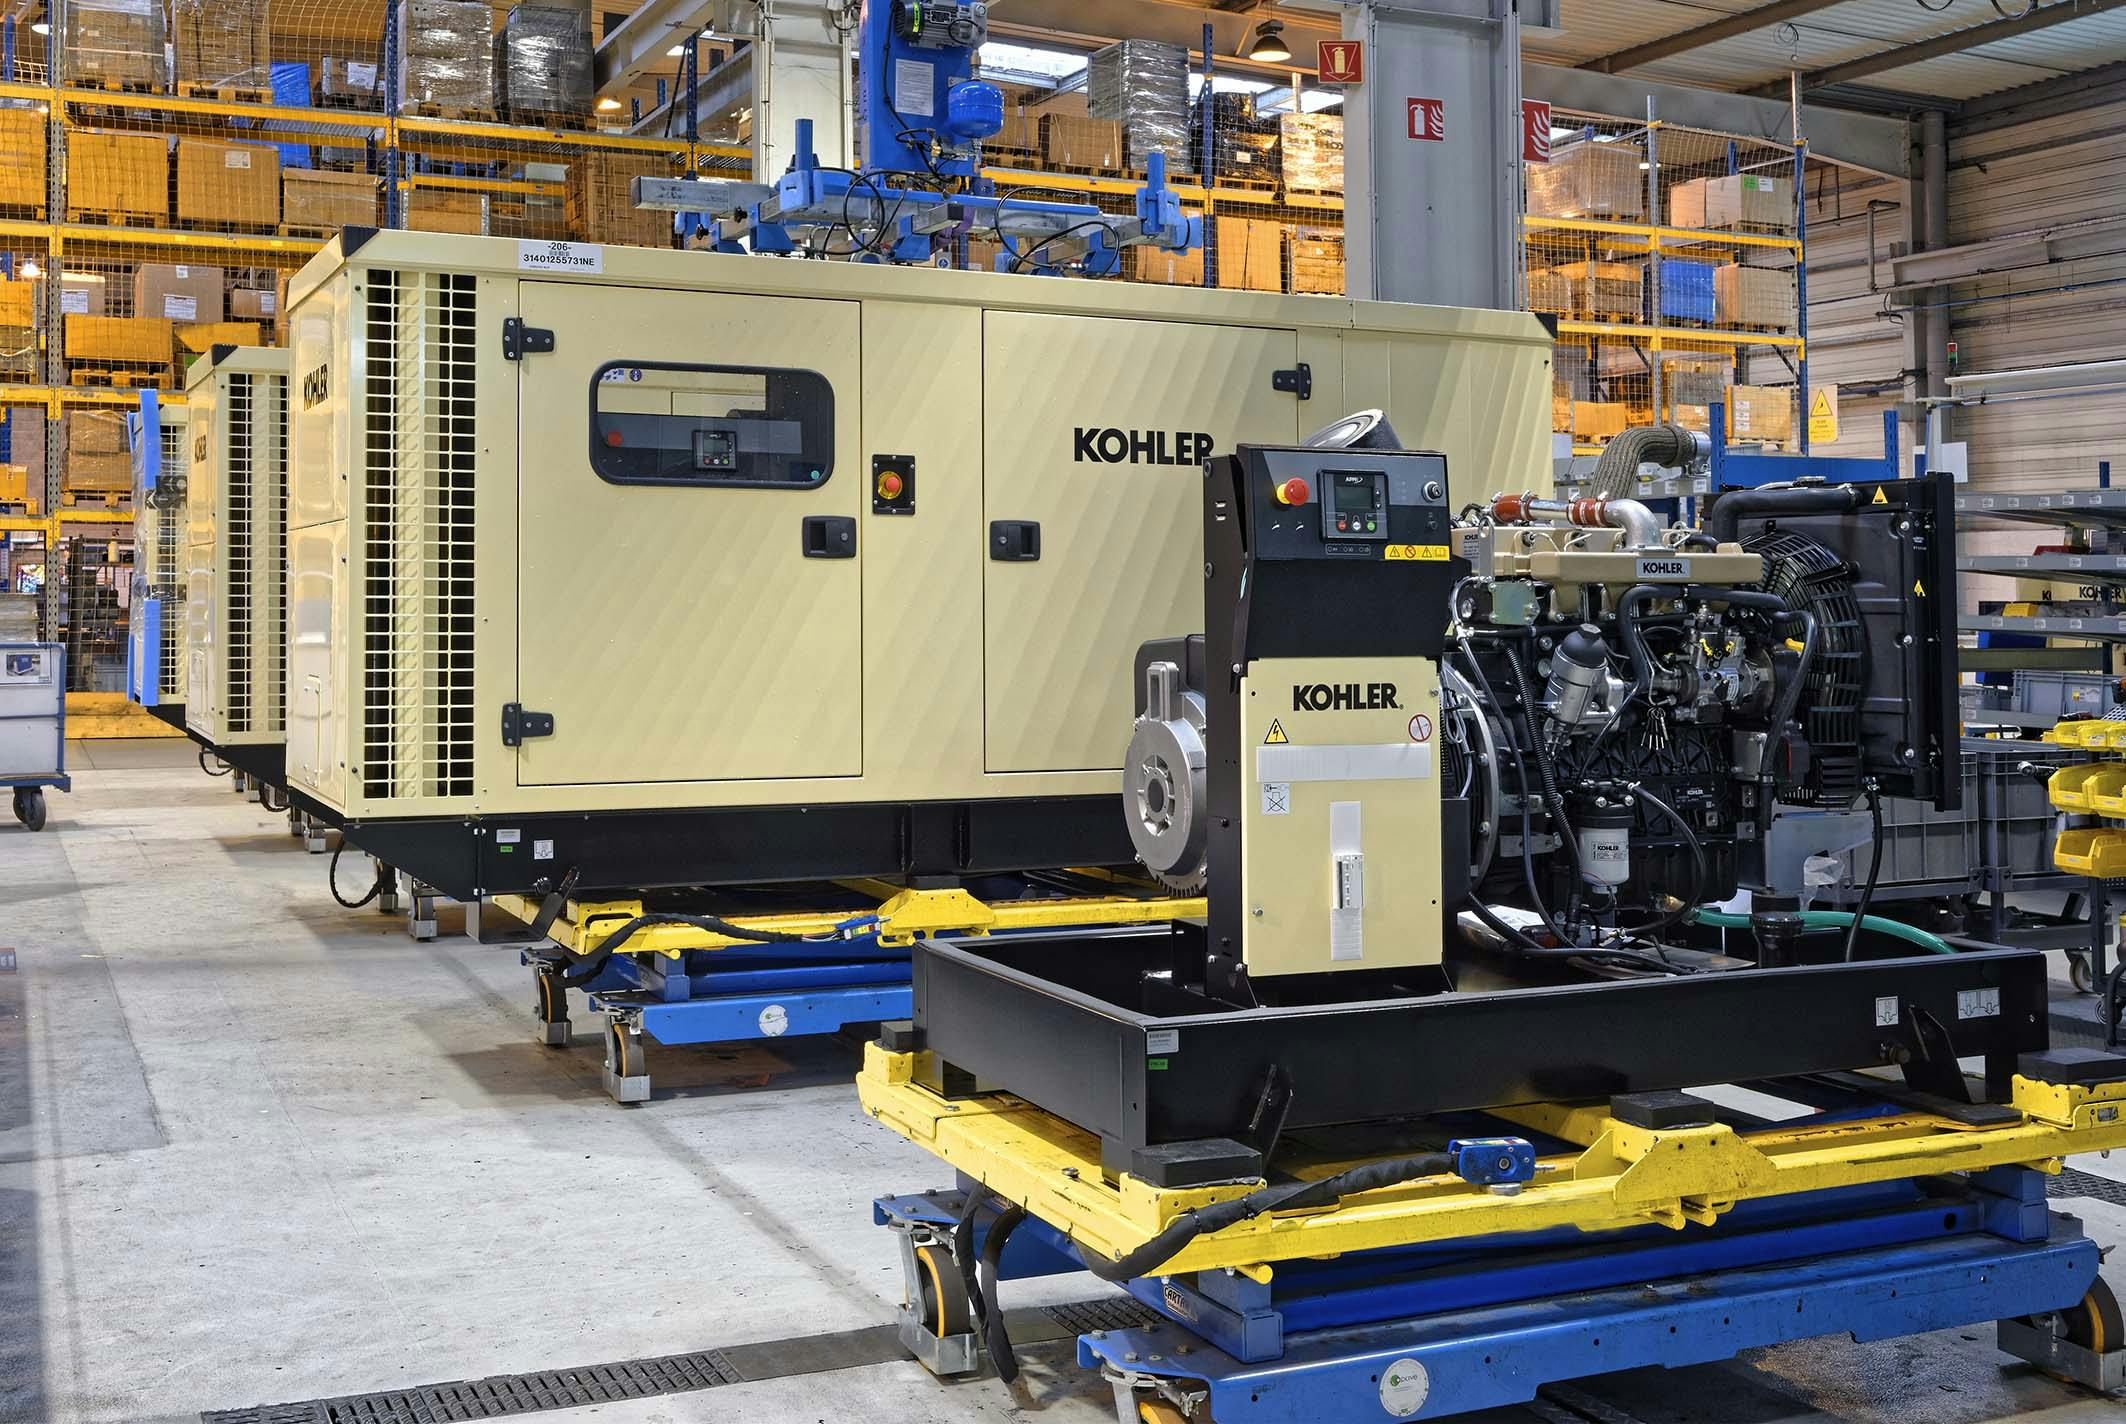 located in Brest, the plant designs and manufactures 35,000 gensets a year